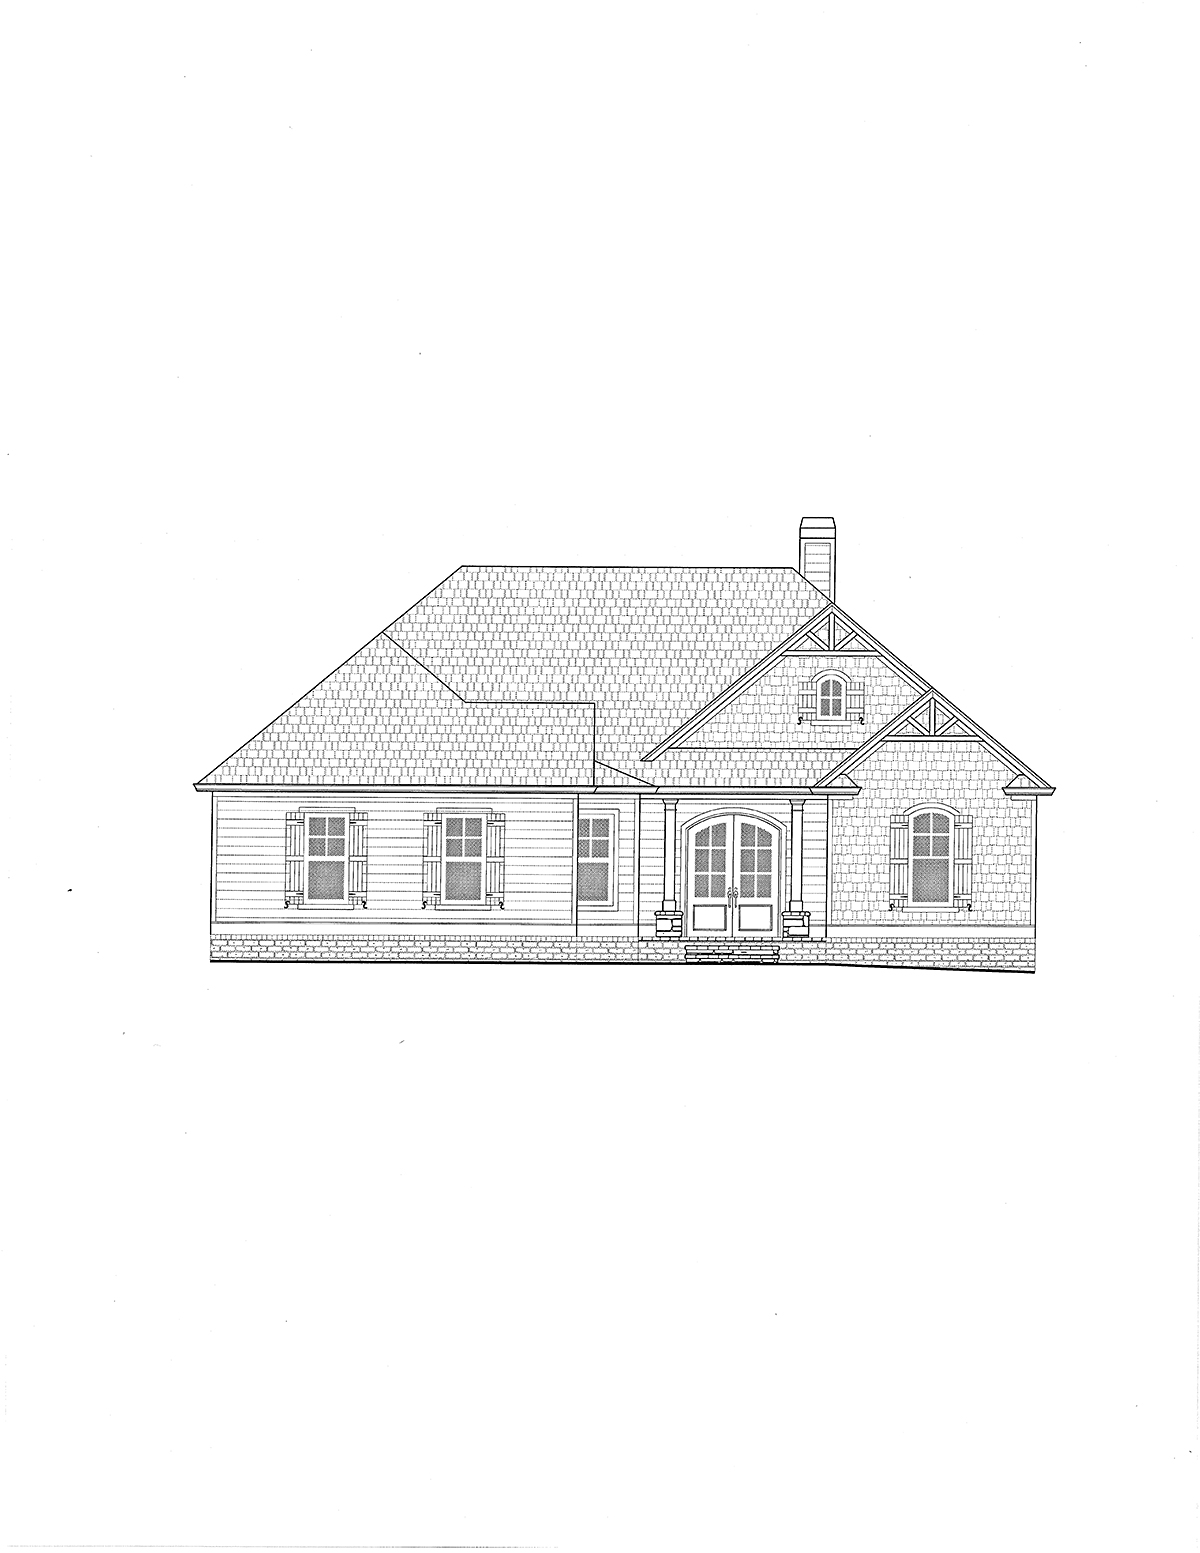 Craftsman, Farmhouse Plan with 3326 Sq. Ft., 4 Bedrooms, 4 Bathrooms, 3 Car Garage Picture 2